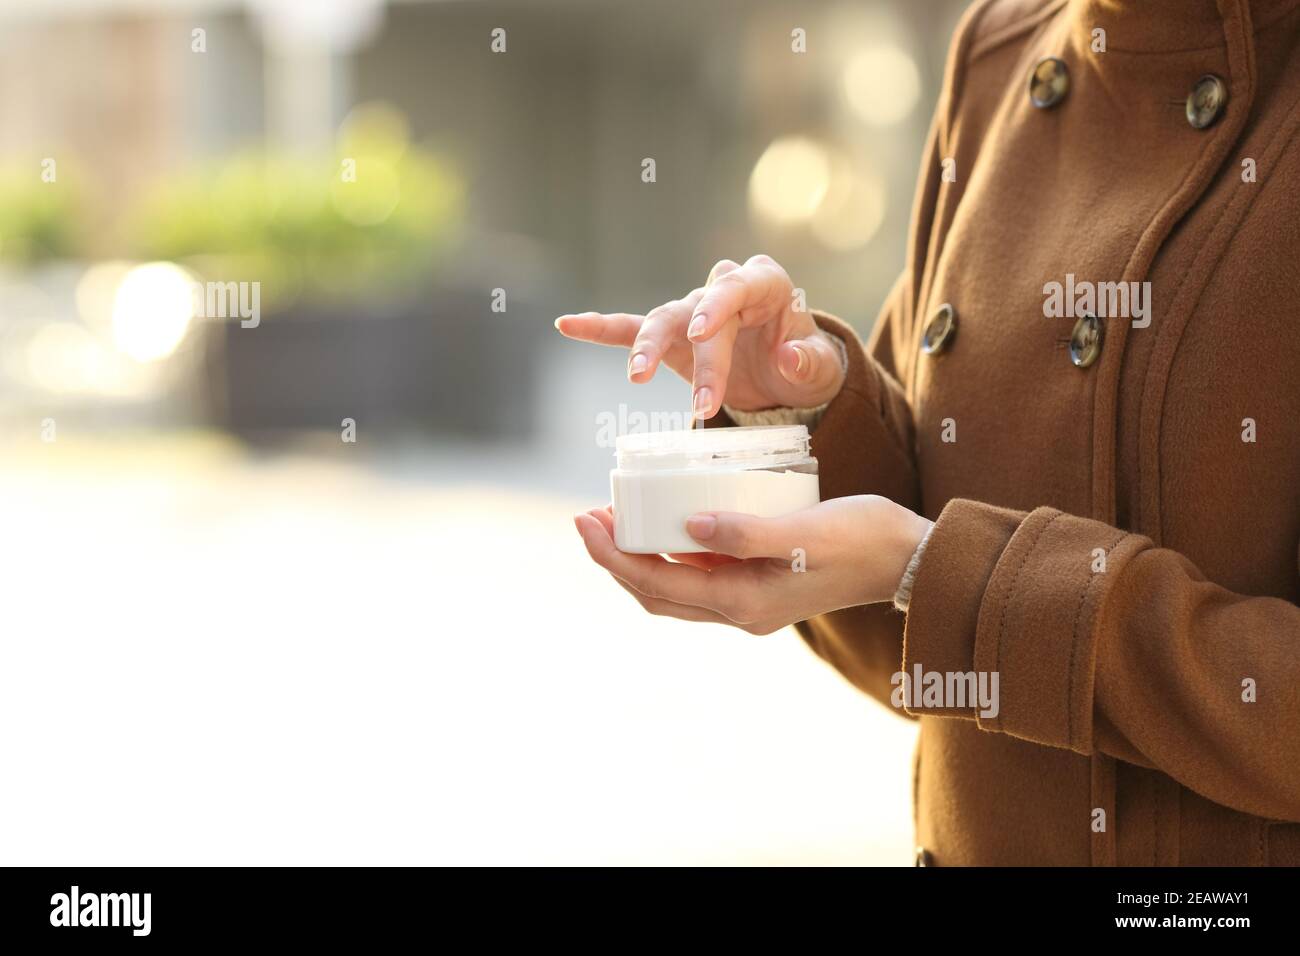 Woman hands holding moisturizer cream ready to apply Stock Photo